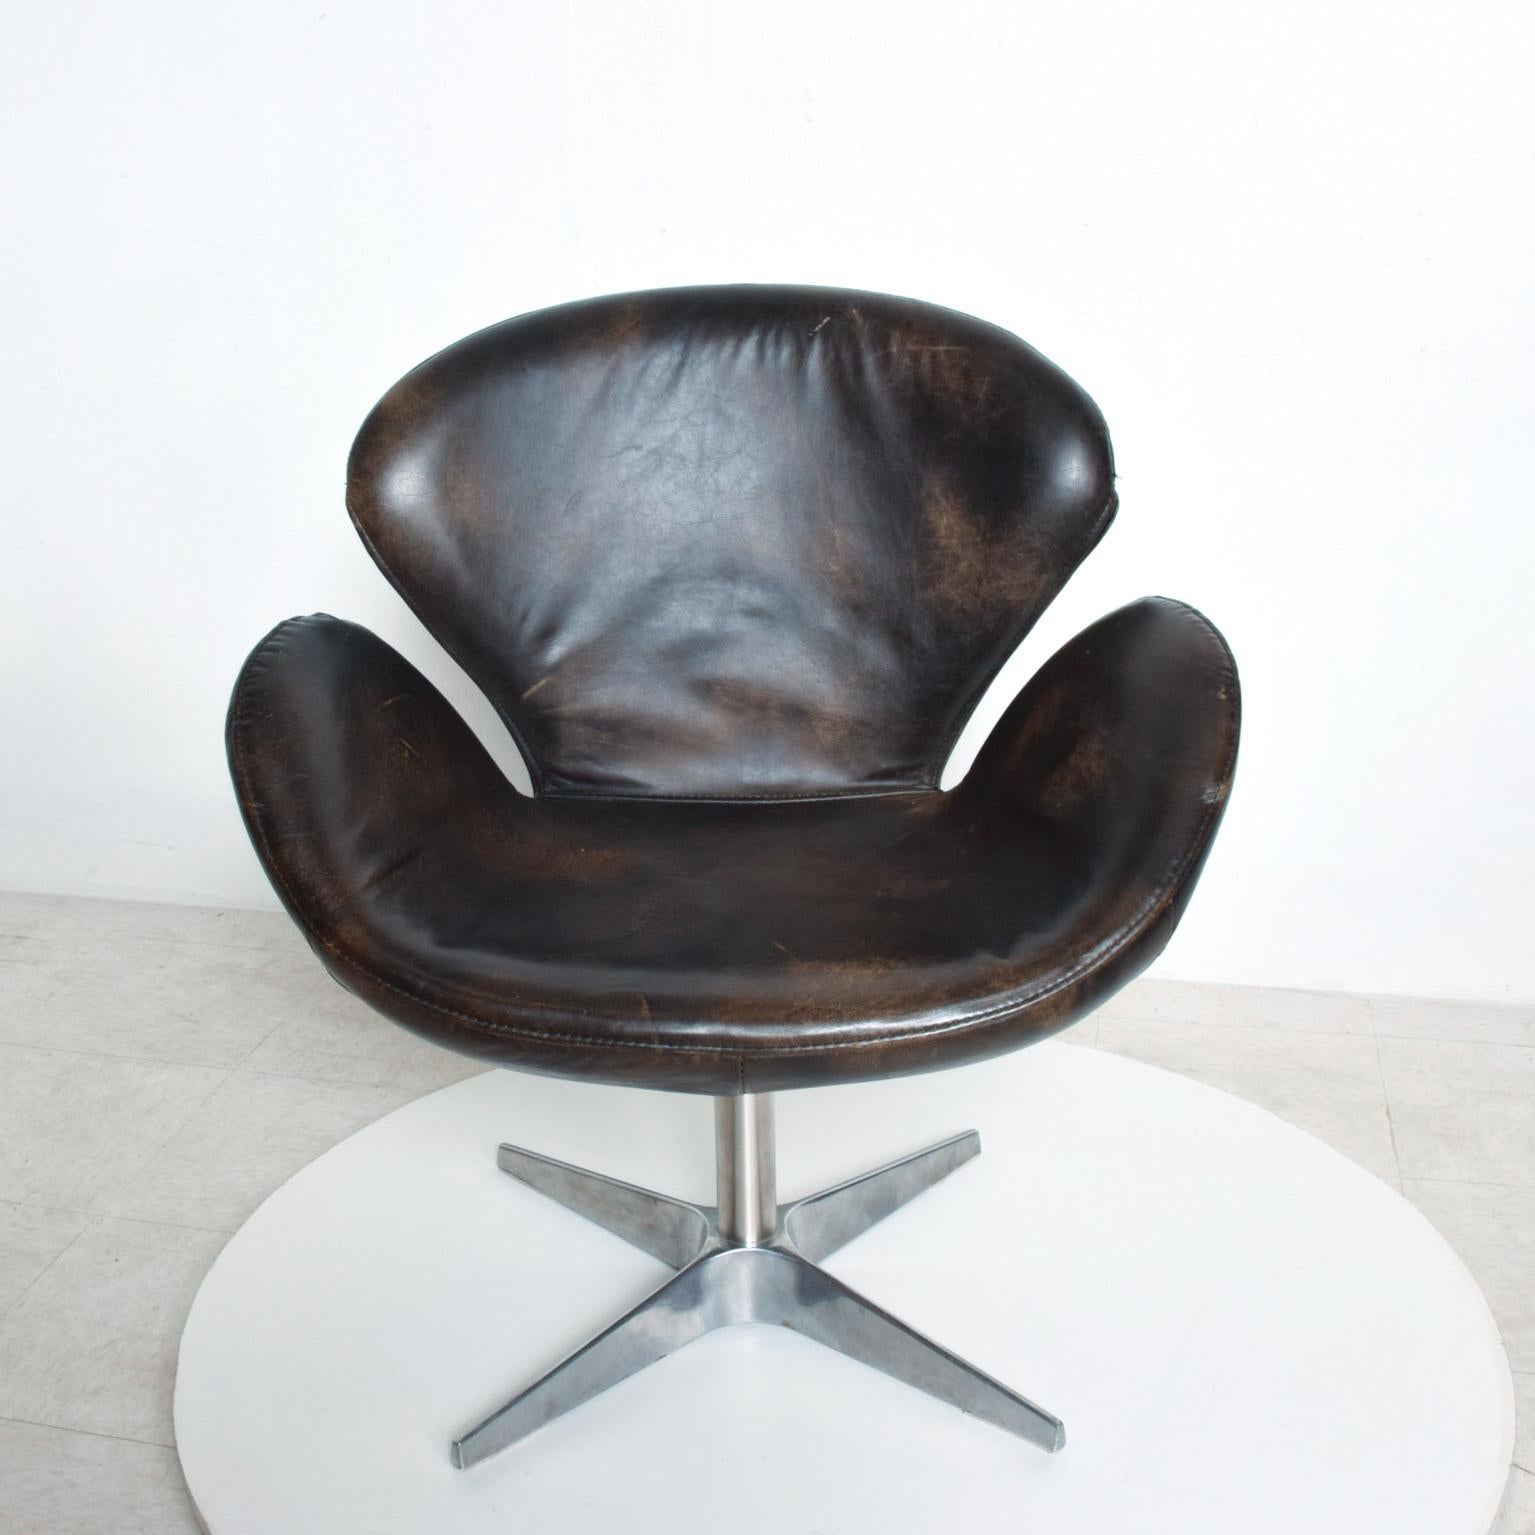 For Your Consideration A Mid Century Modern Leather Swivel Lounge Chair in the style of Arne Jacobsen, Swan Chair.
Amazing Modern Design and Comfort.
Dimensions are: 32 1/2